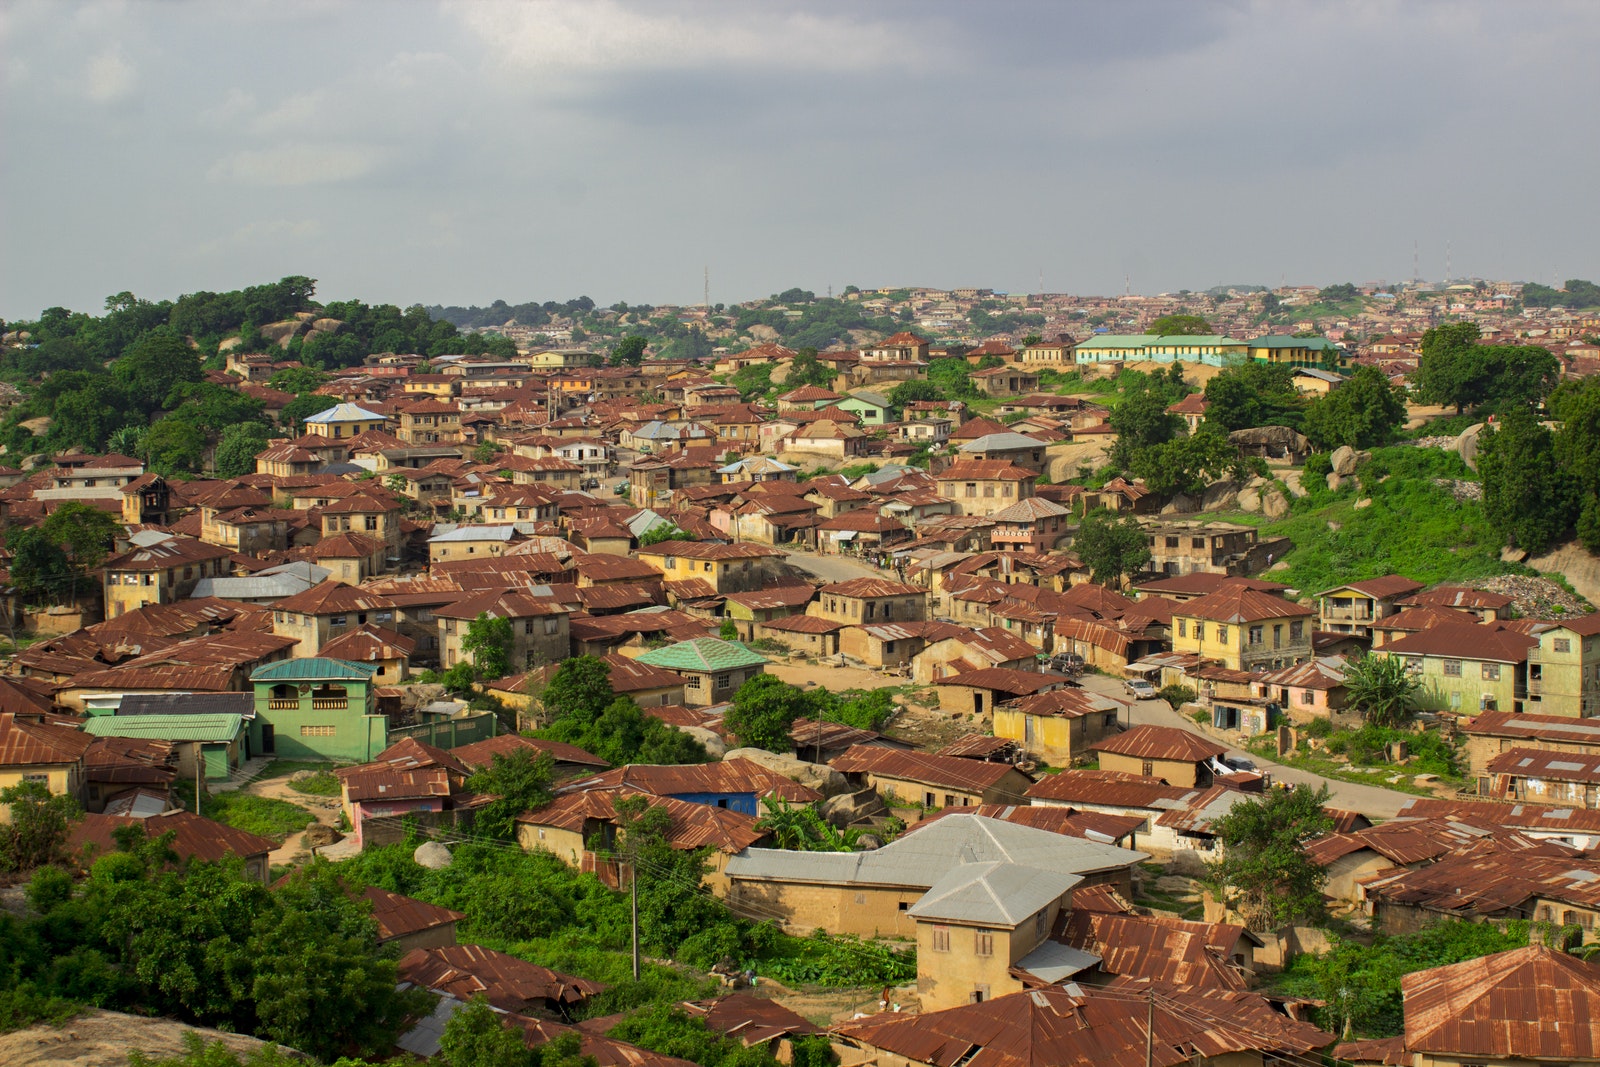 Top View of Houses and Building Roofs